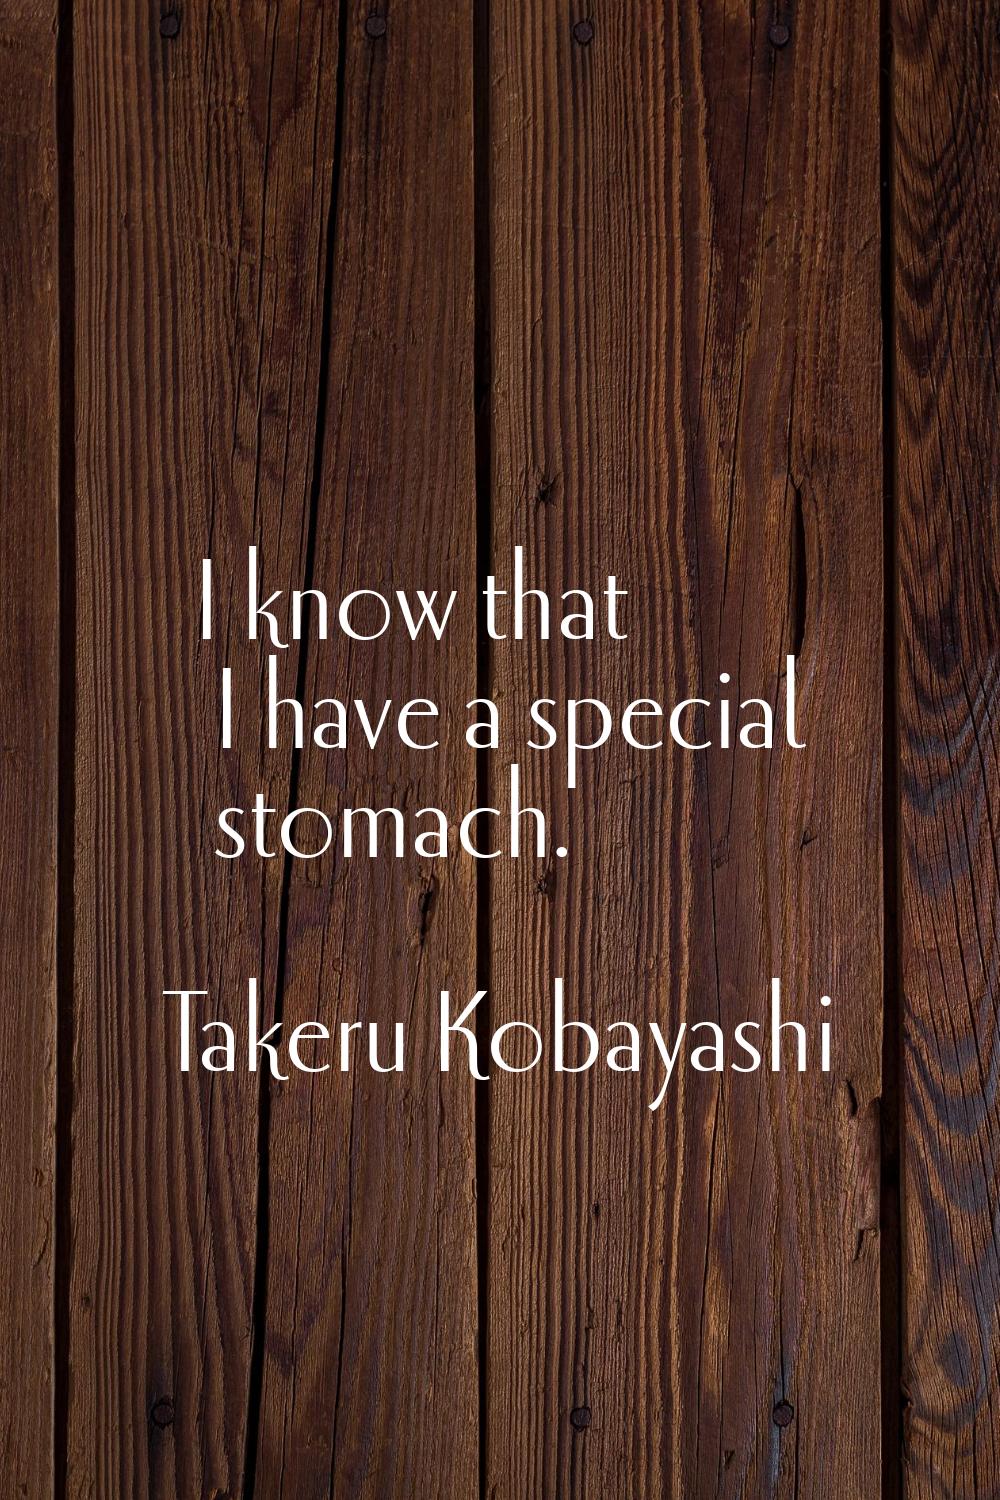 I know that I have a special stomach.